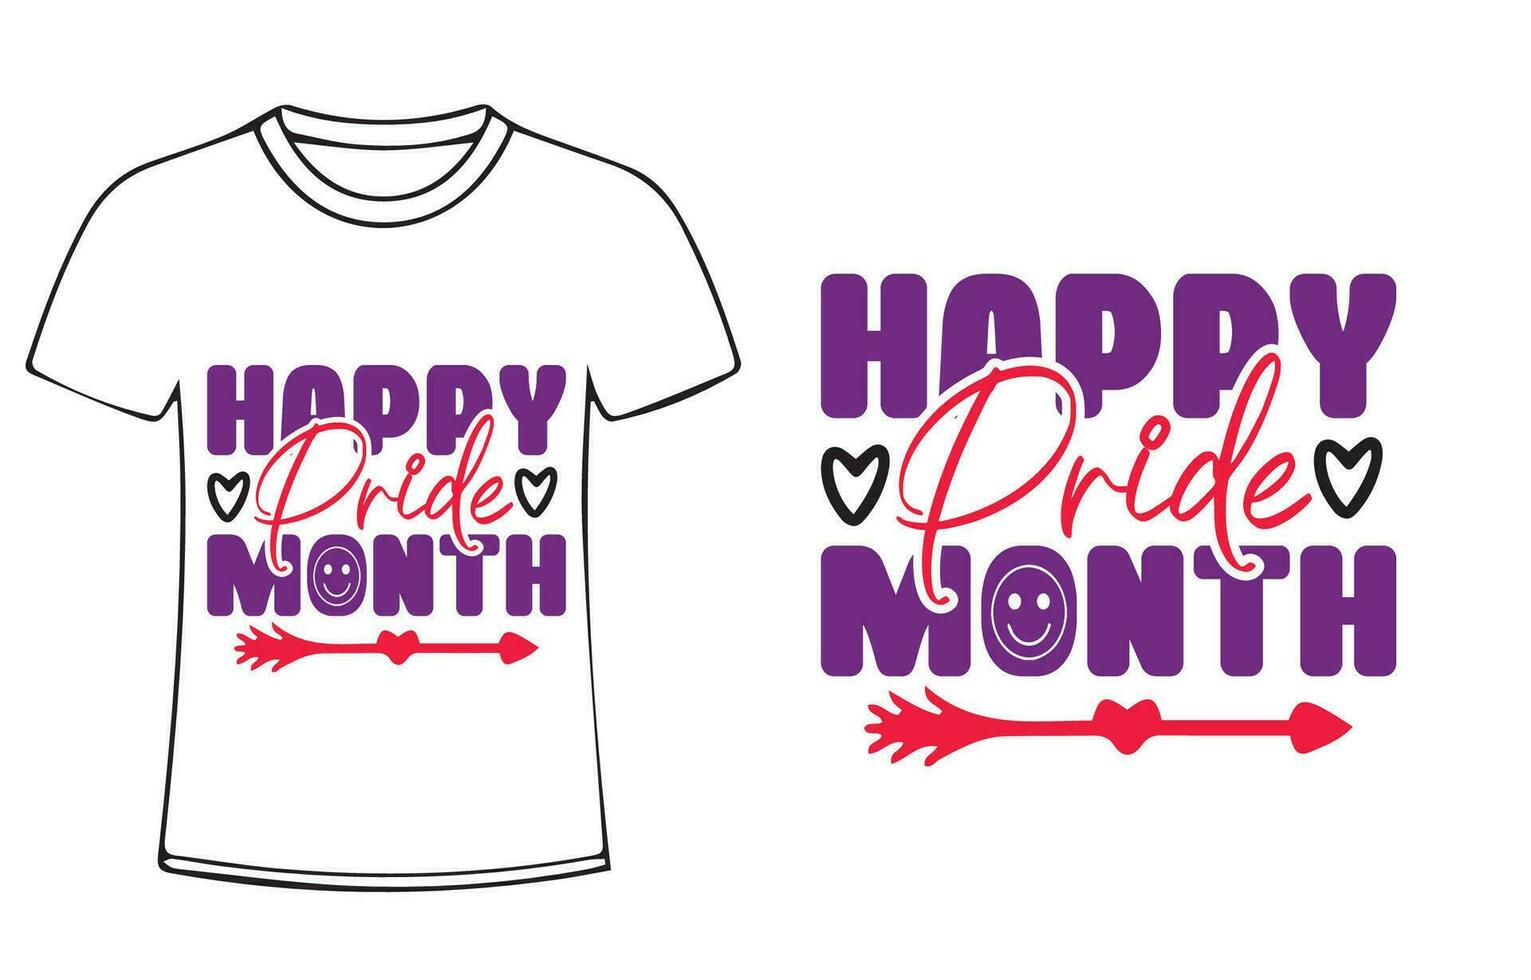 pride month typography design for t-shirt, cards, frame artwork, bags, mugs, stickers, tumblers, phone cases, print etc. vector